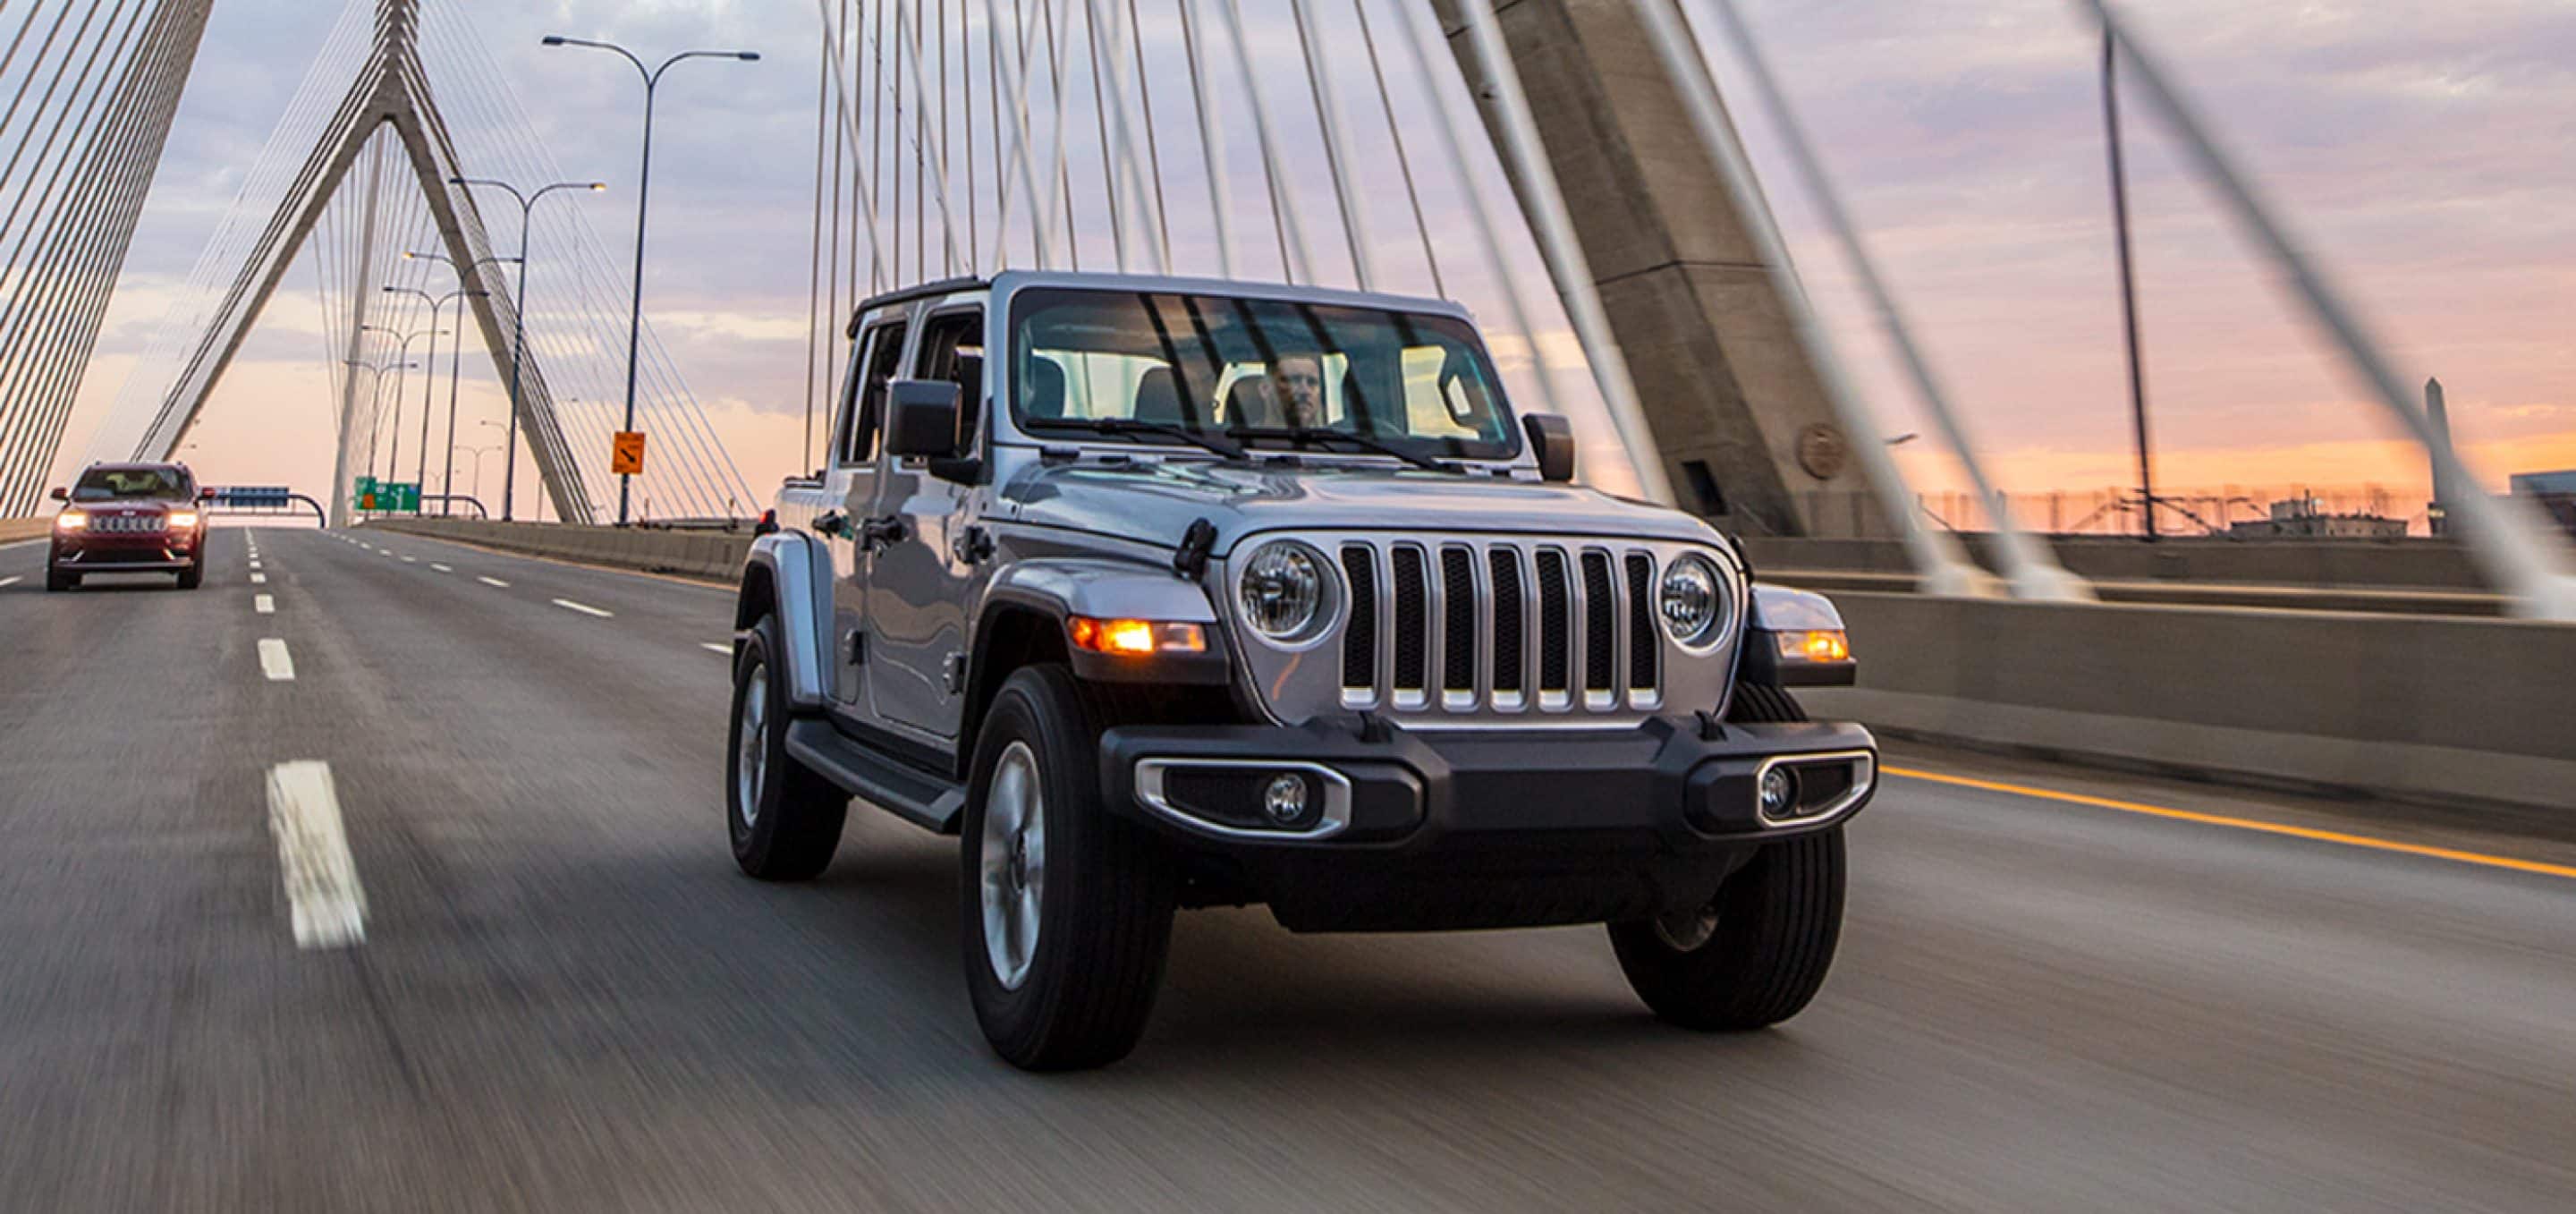 Why Rent a Jeep Wrangler 